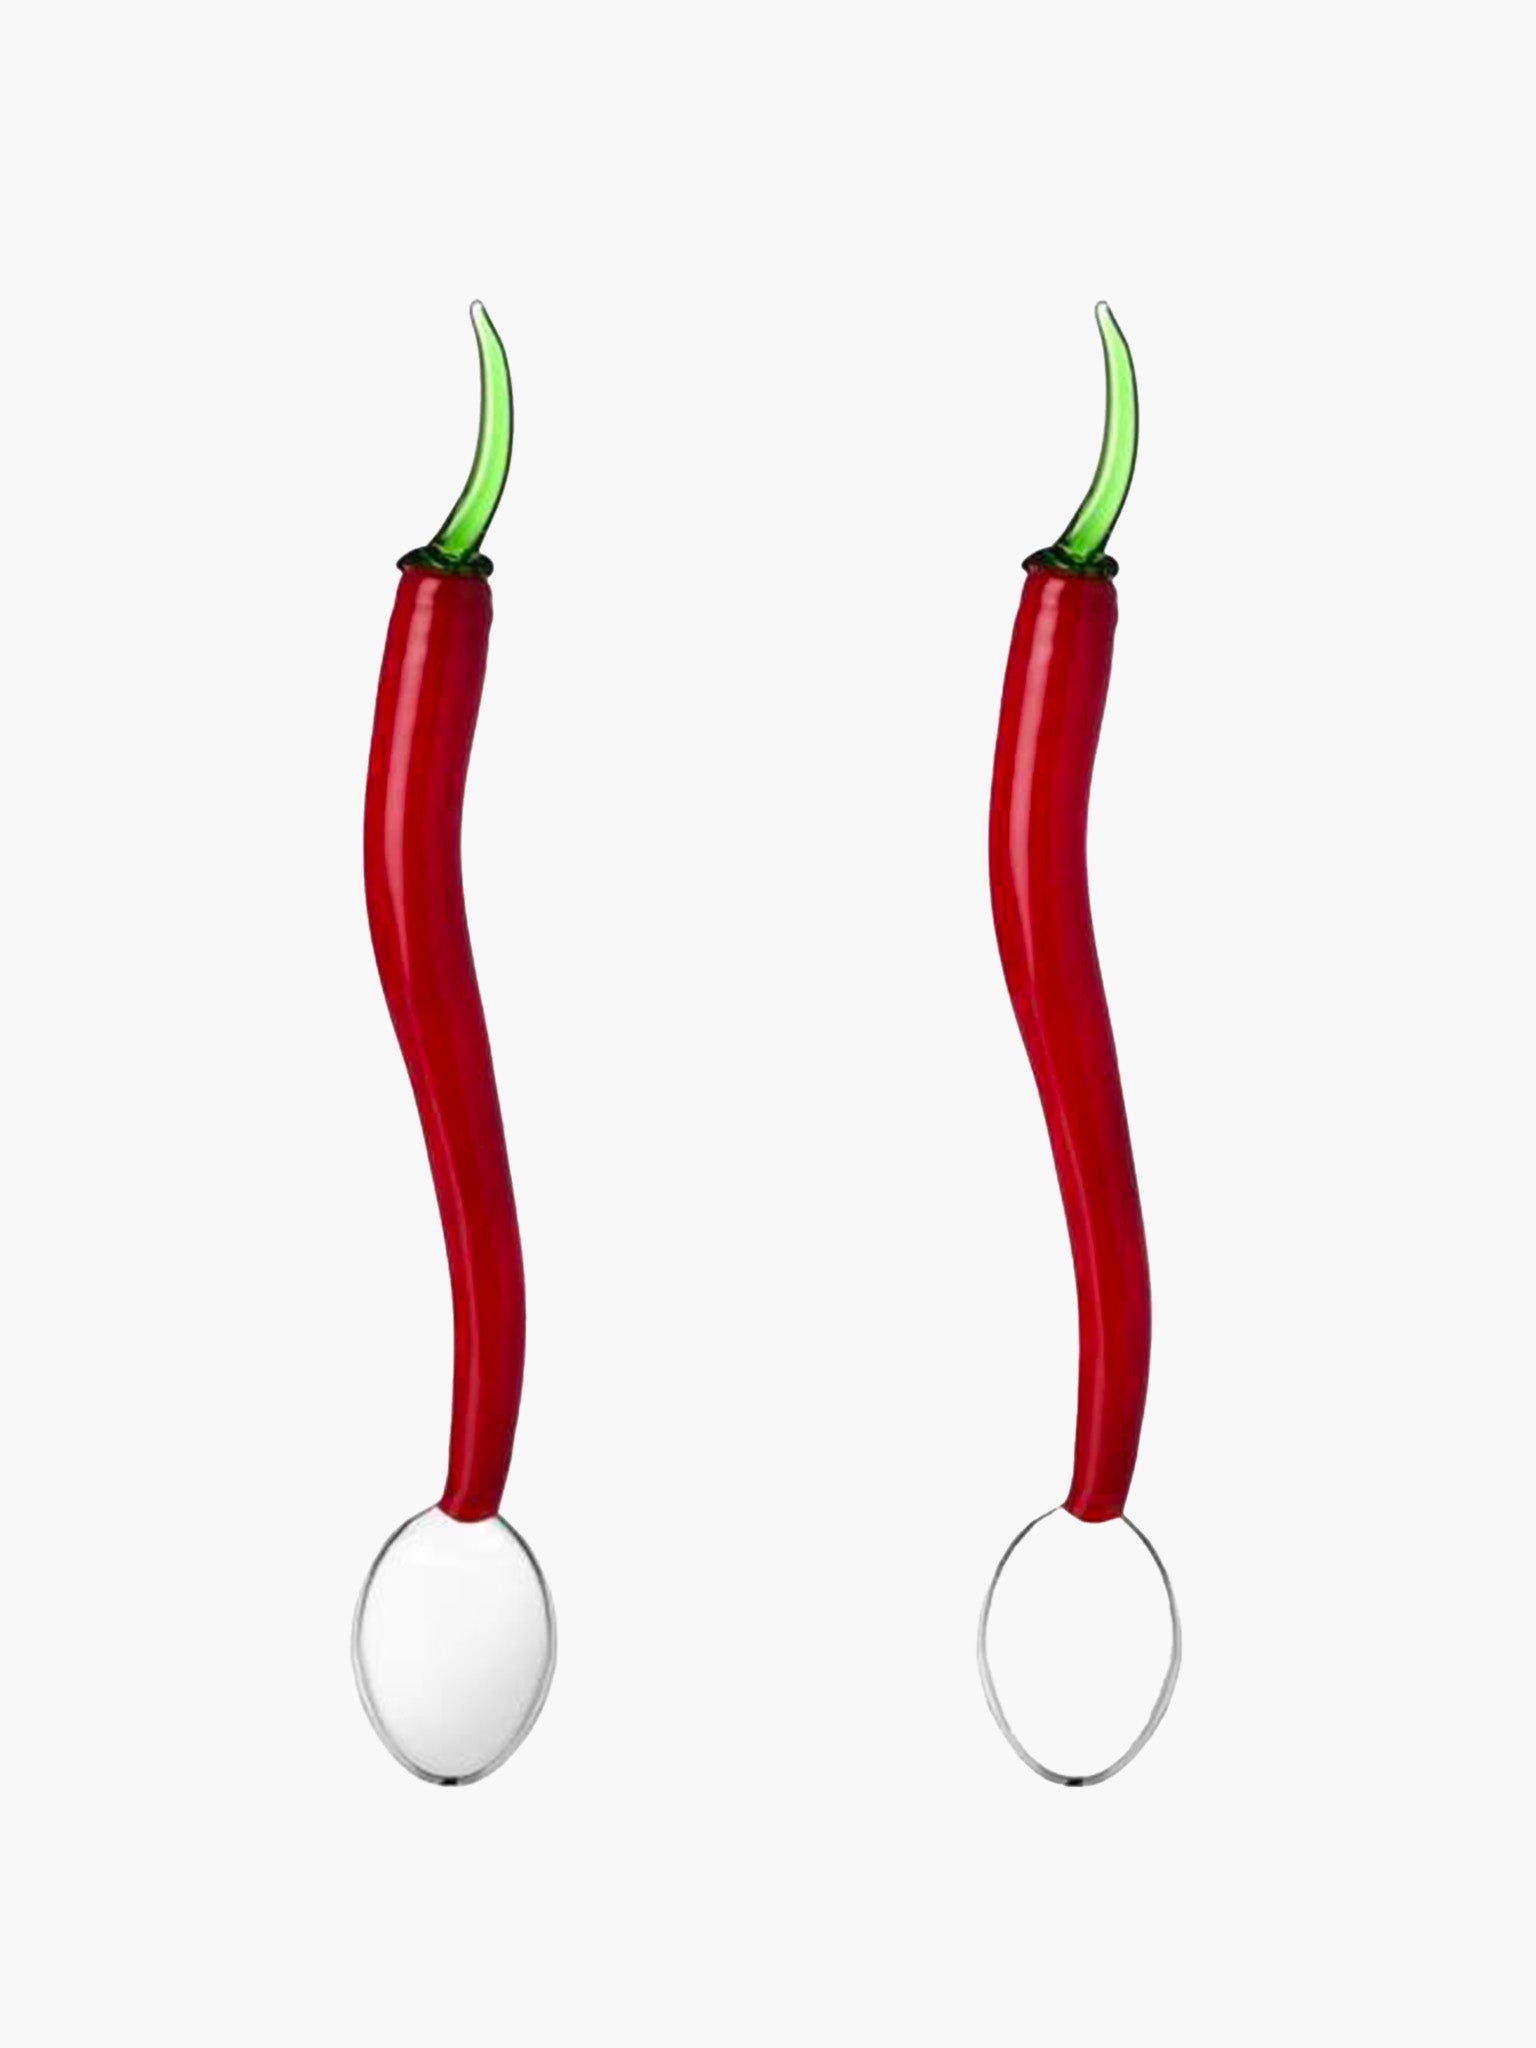 Glass Chilli Spoons - Set of 2